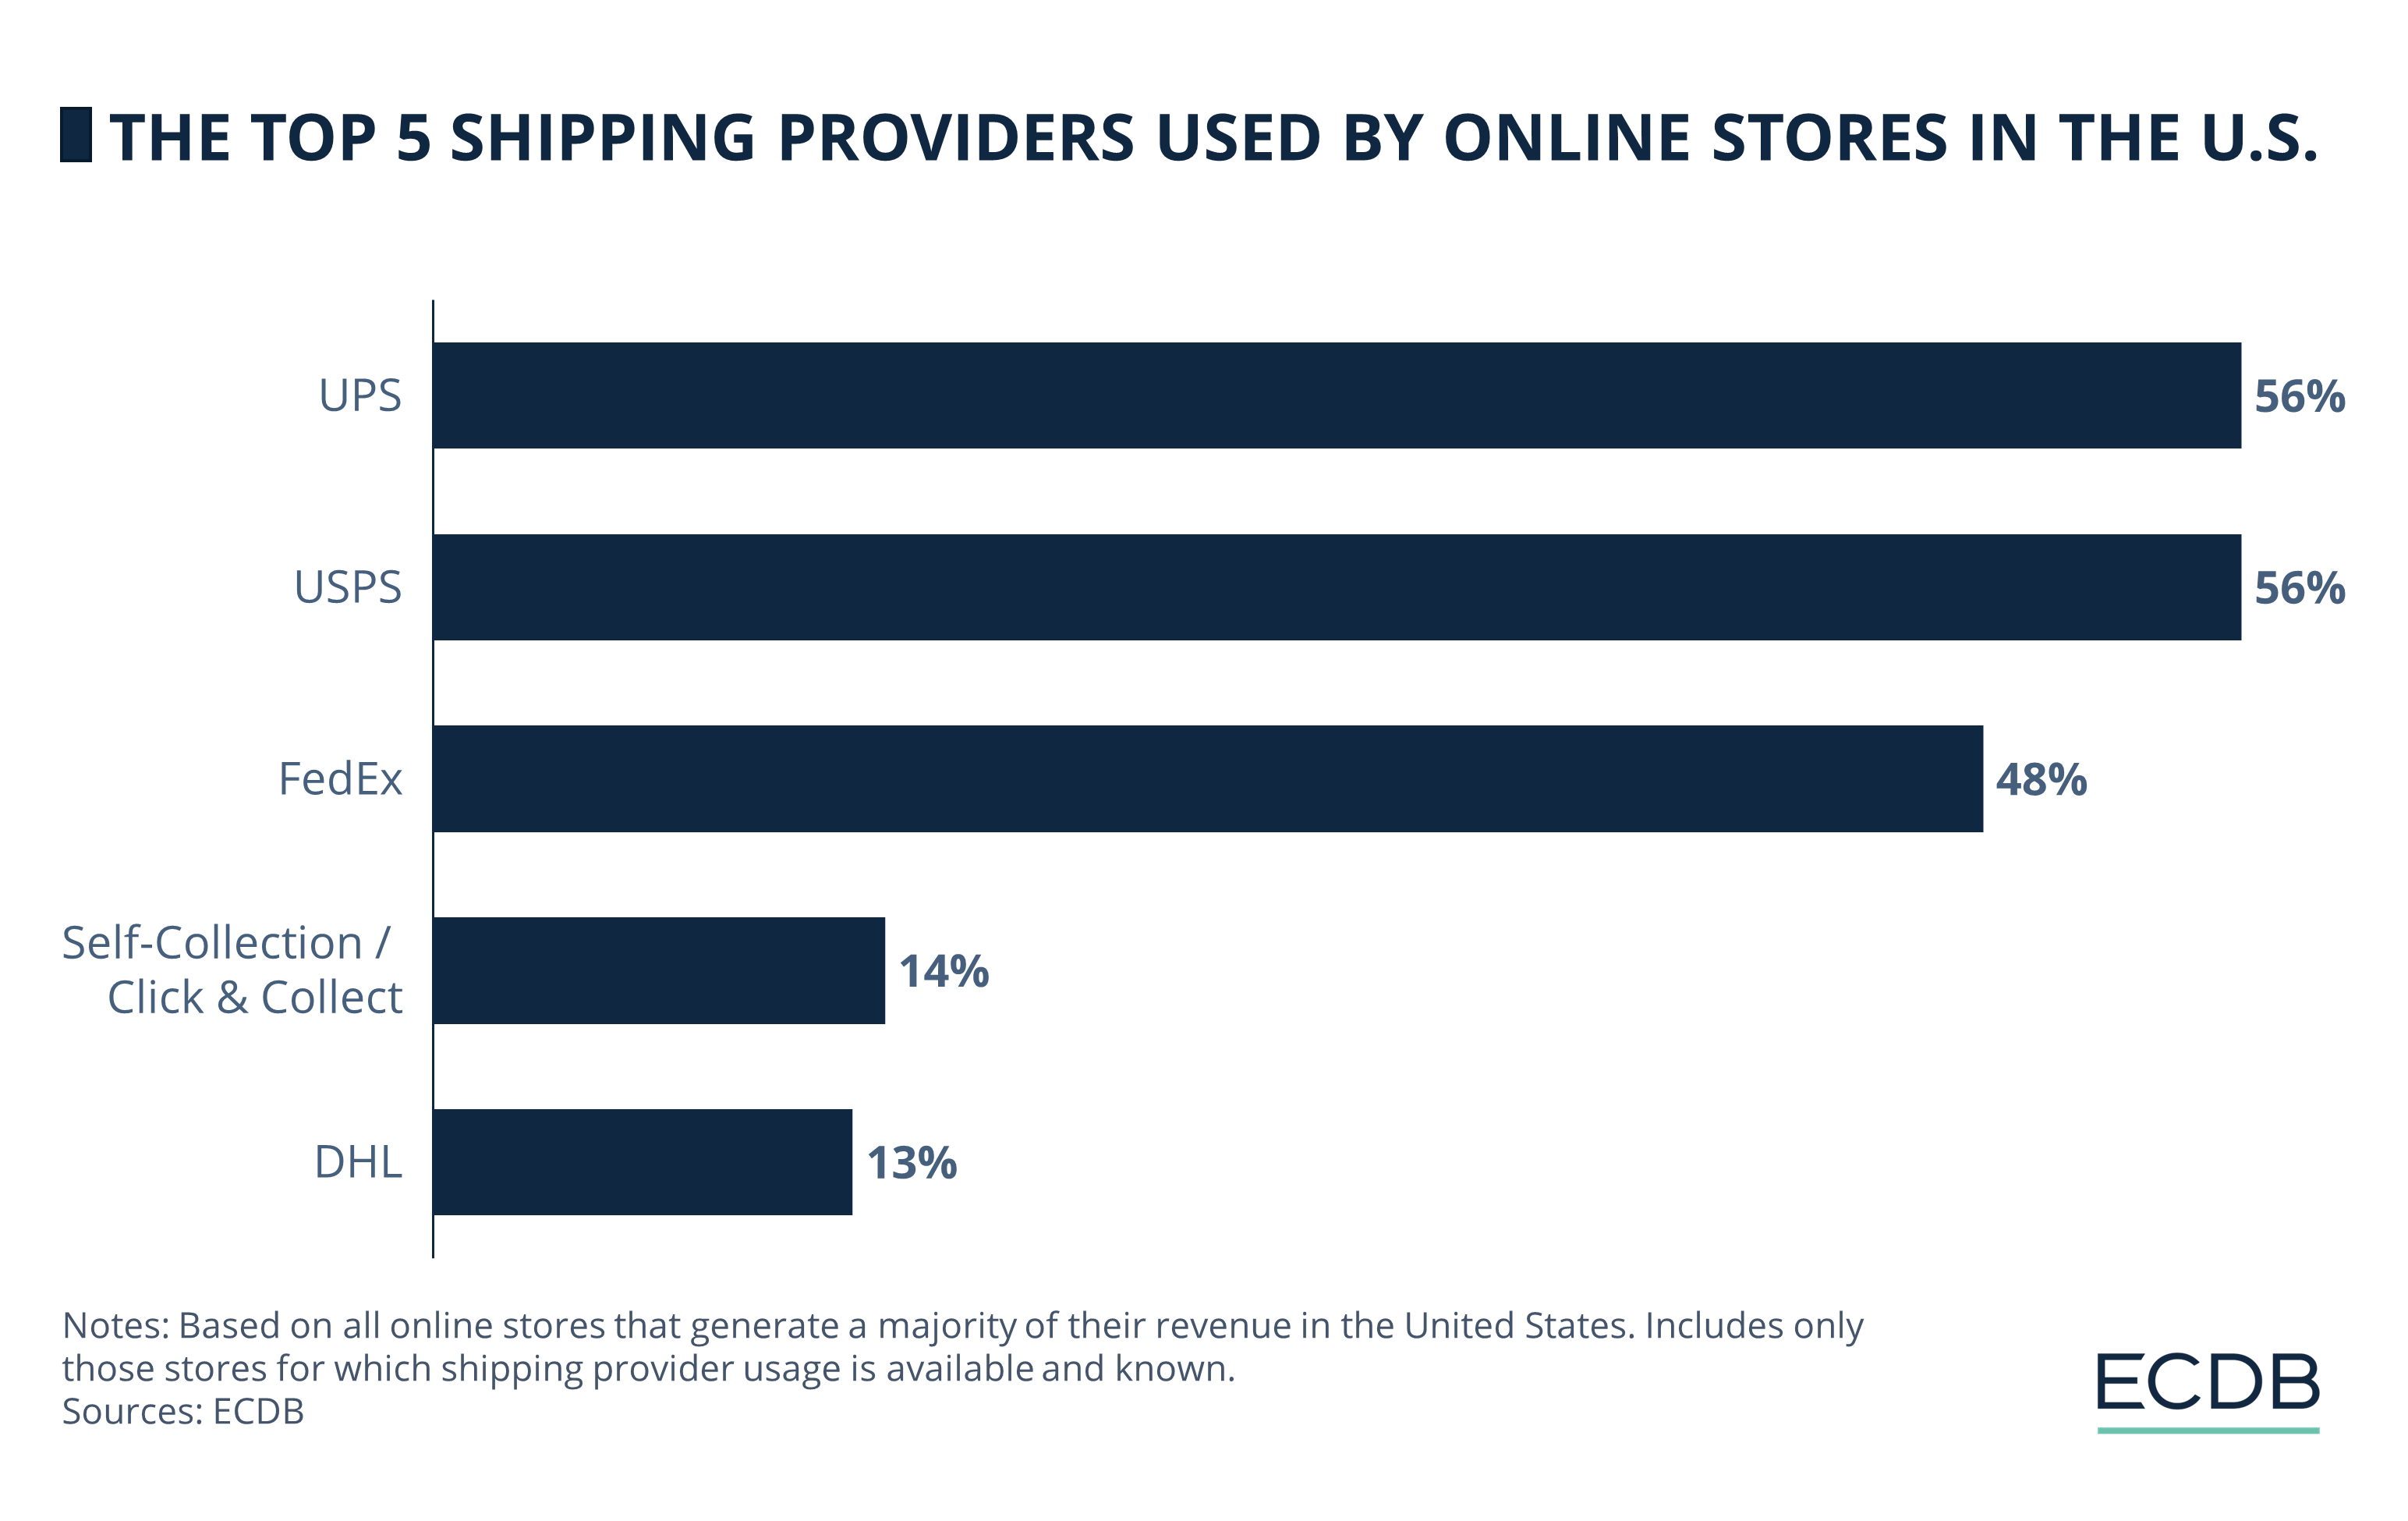 The Most Used Shipping Providers Among Online Shops in the United States